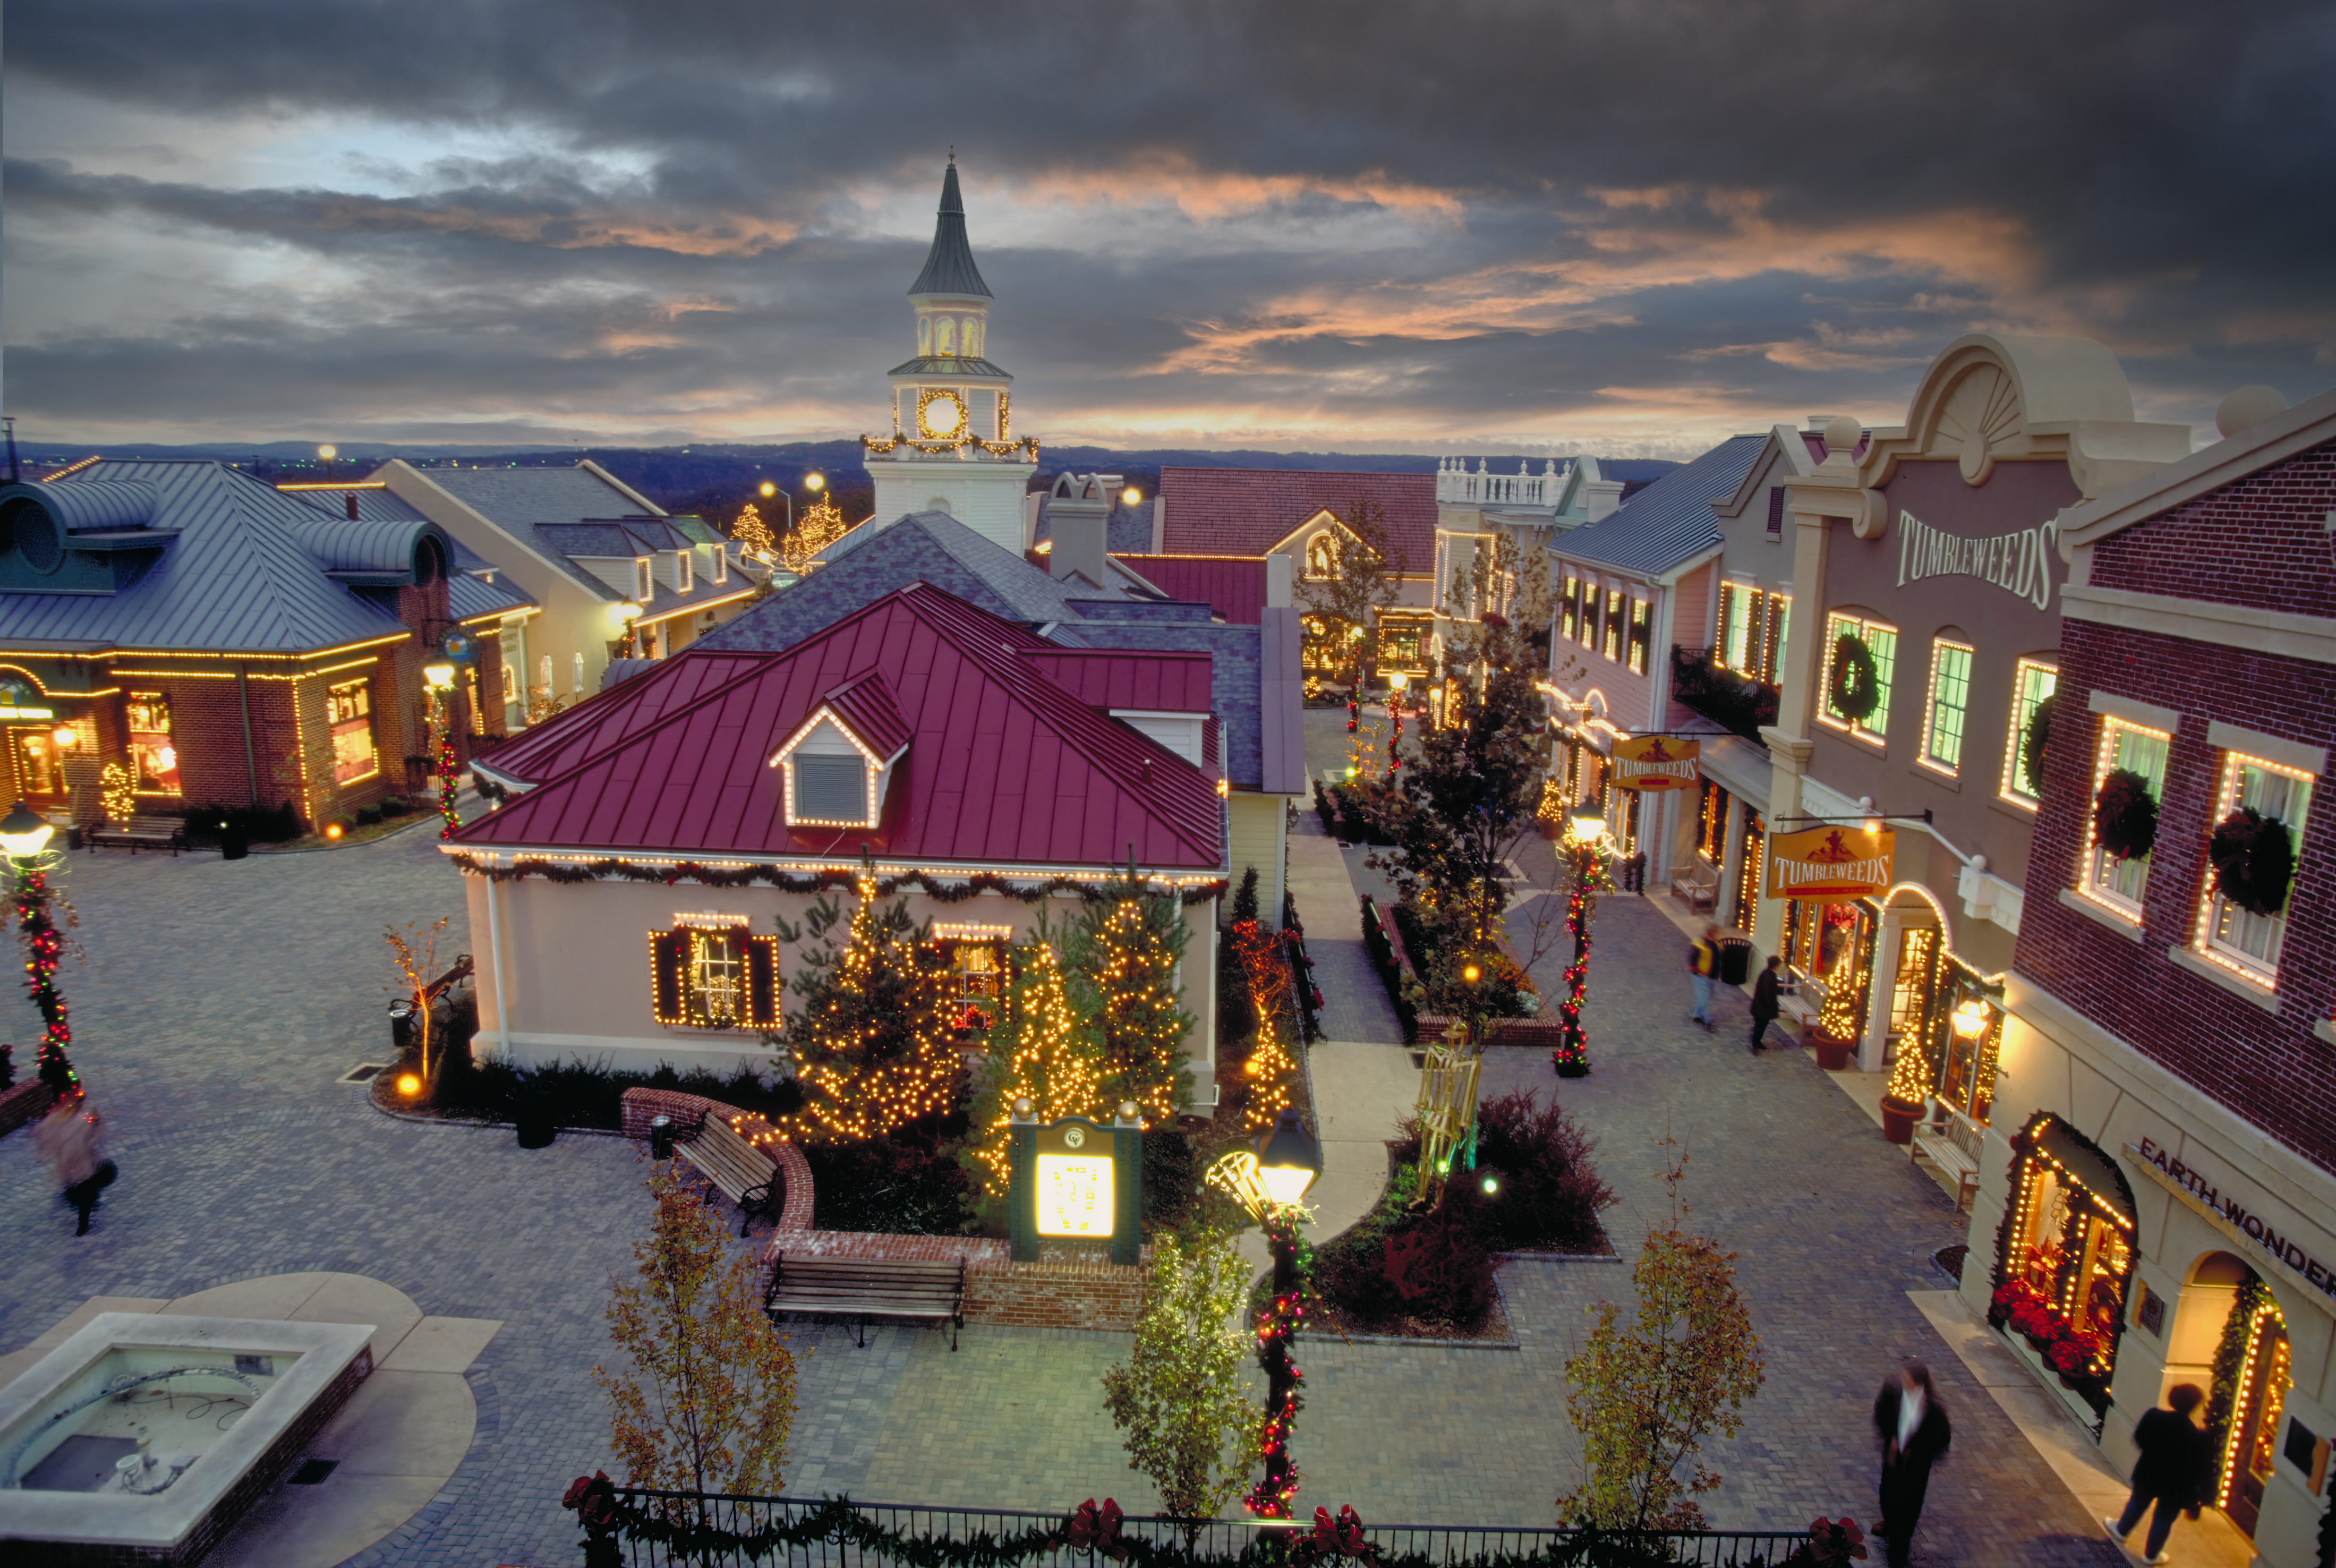 Best Things to Do in Branson During a Family Vacation - Grand Village Shopping Center in Branson During Christmas